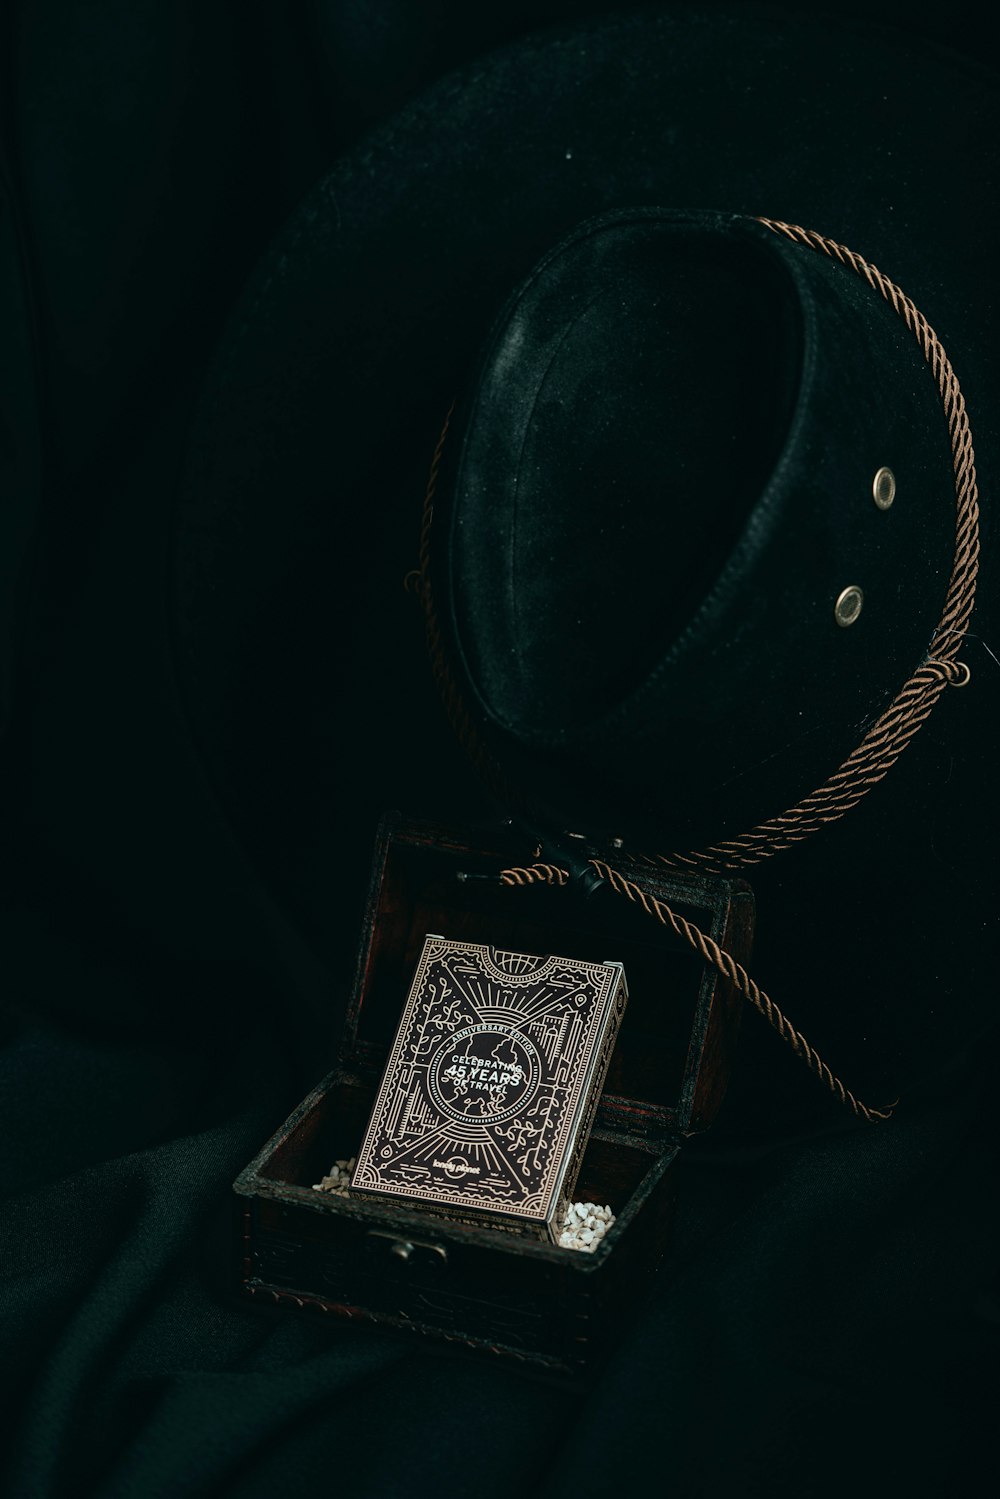 a black hat and a playing card in a wooden box